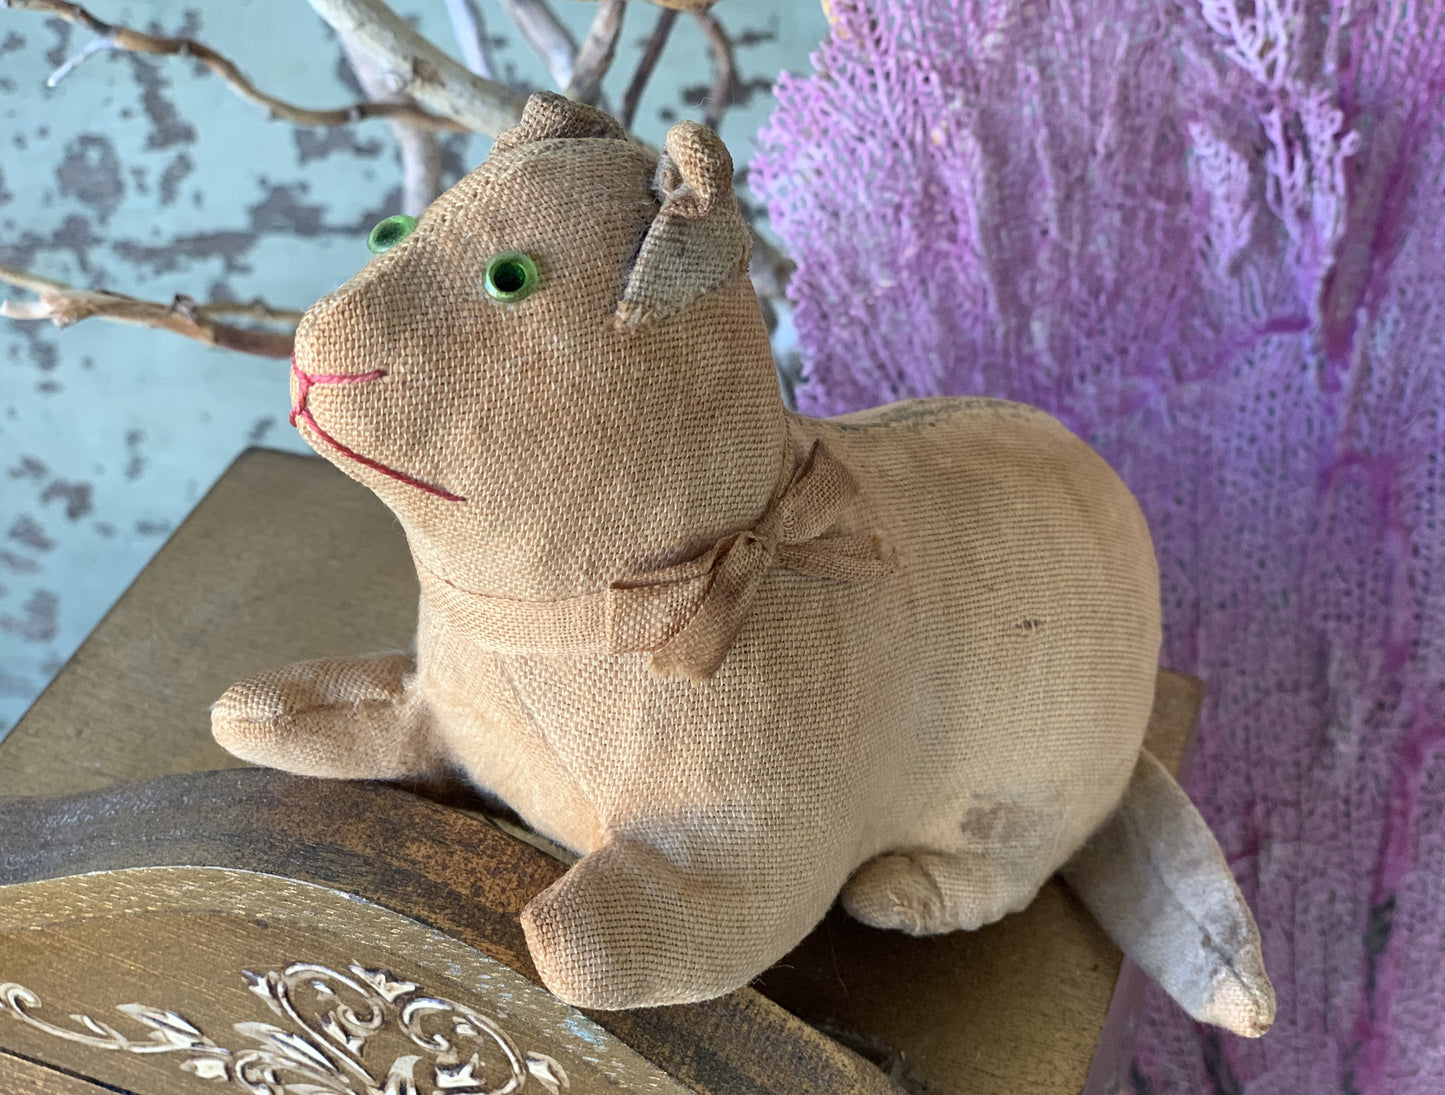 Vintage stuffed toy kitty with glass eyes